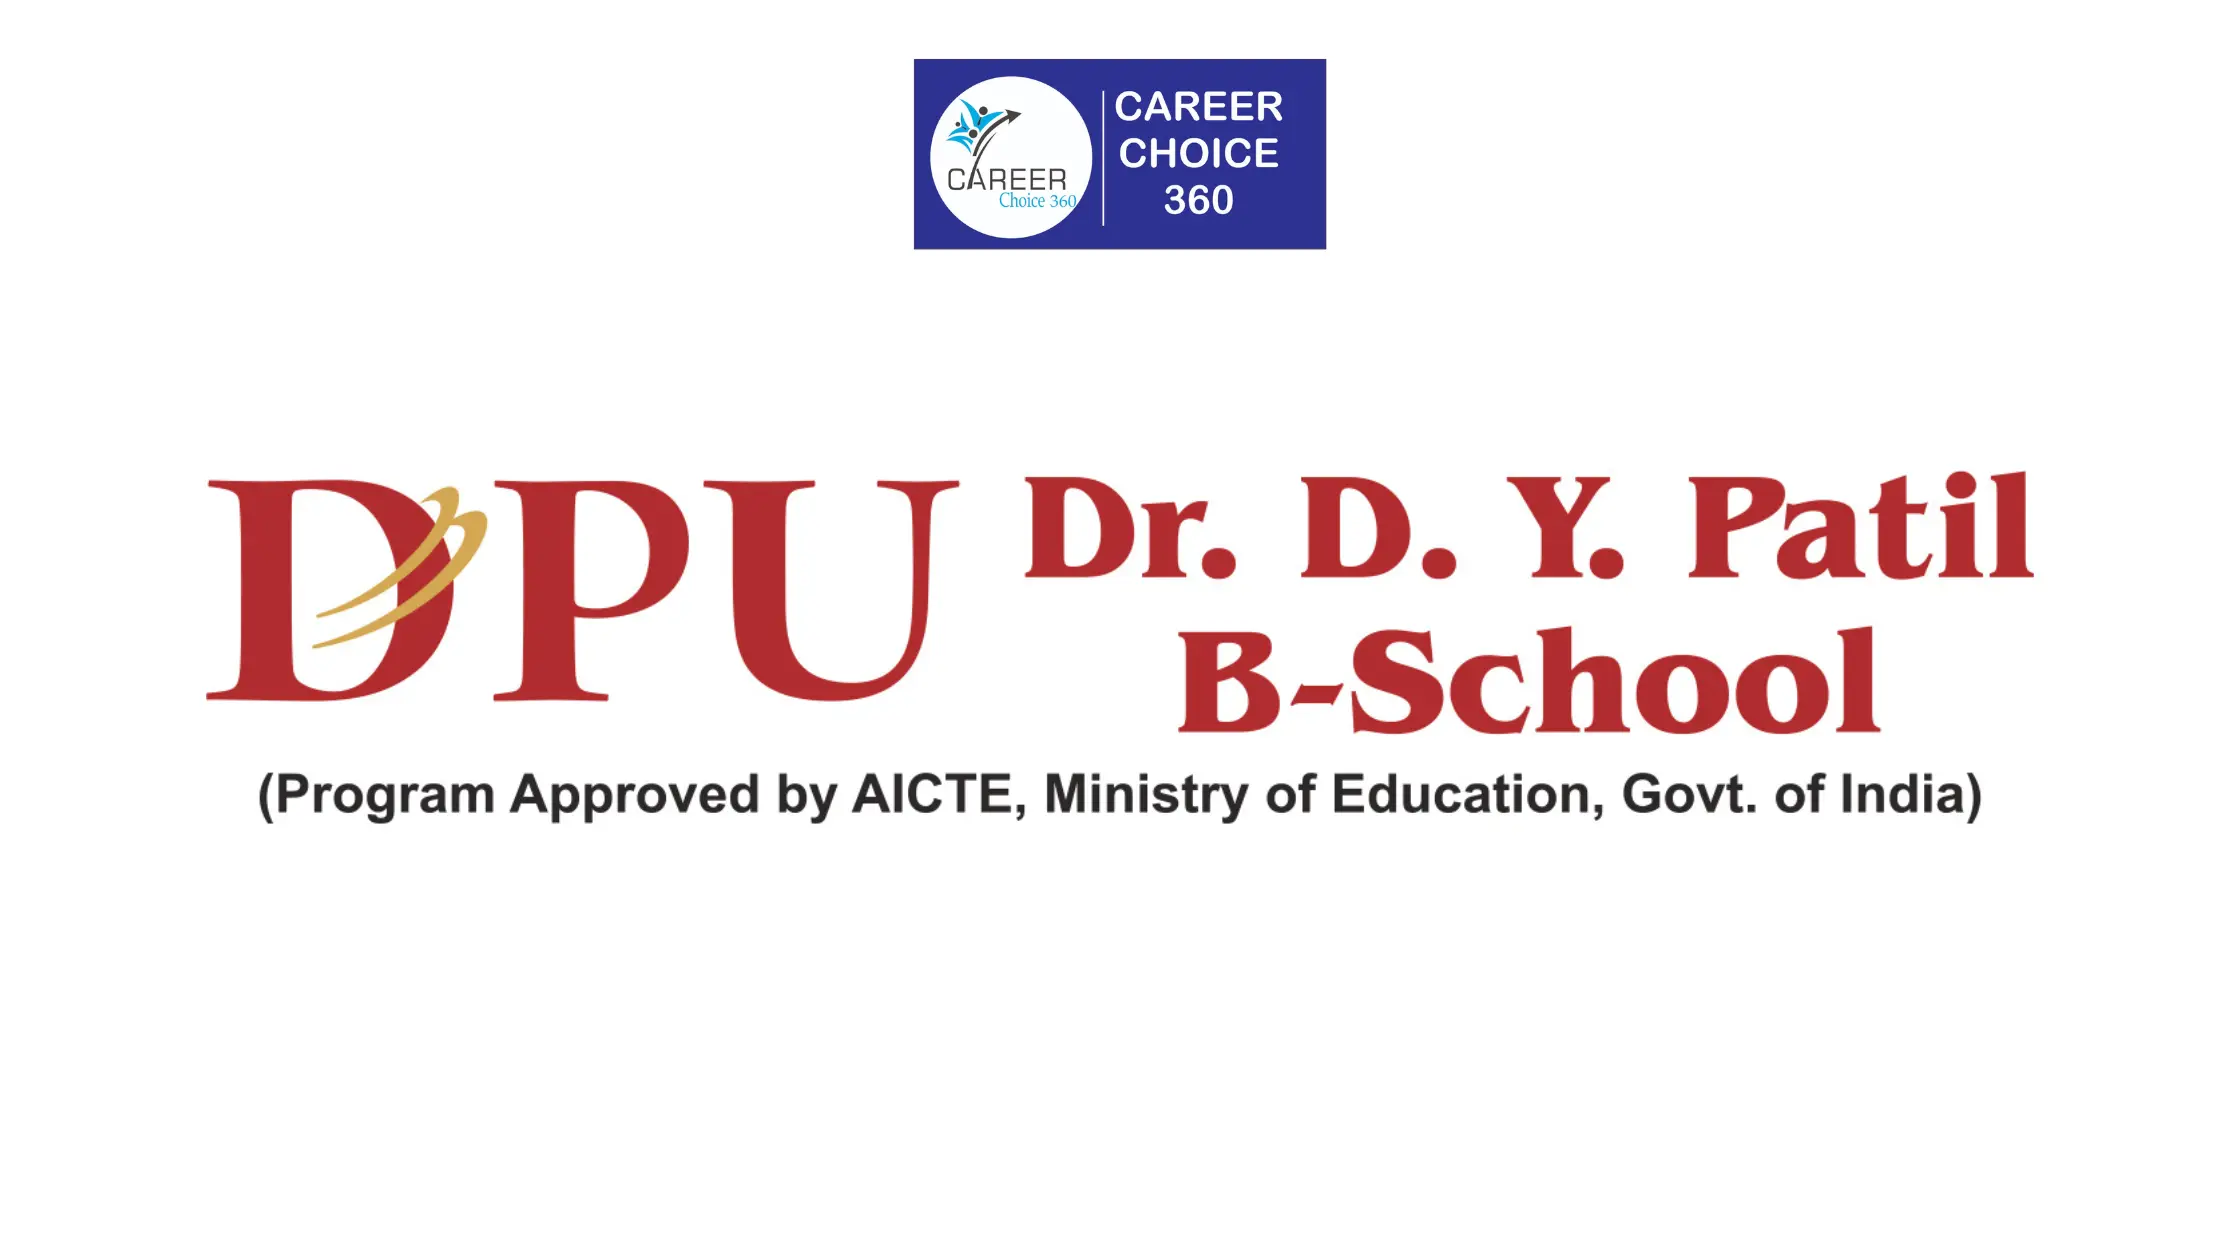 You are currently viewing Dr. D.Y. Patil B-School, Pune: Highlights, Courses and Fees, Admissions, Eligibility Criteria, Selection Procedure, Cutoff, Placement, Ranking, Scholarship